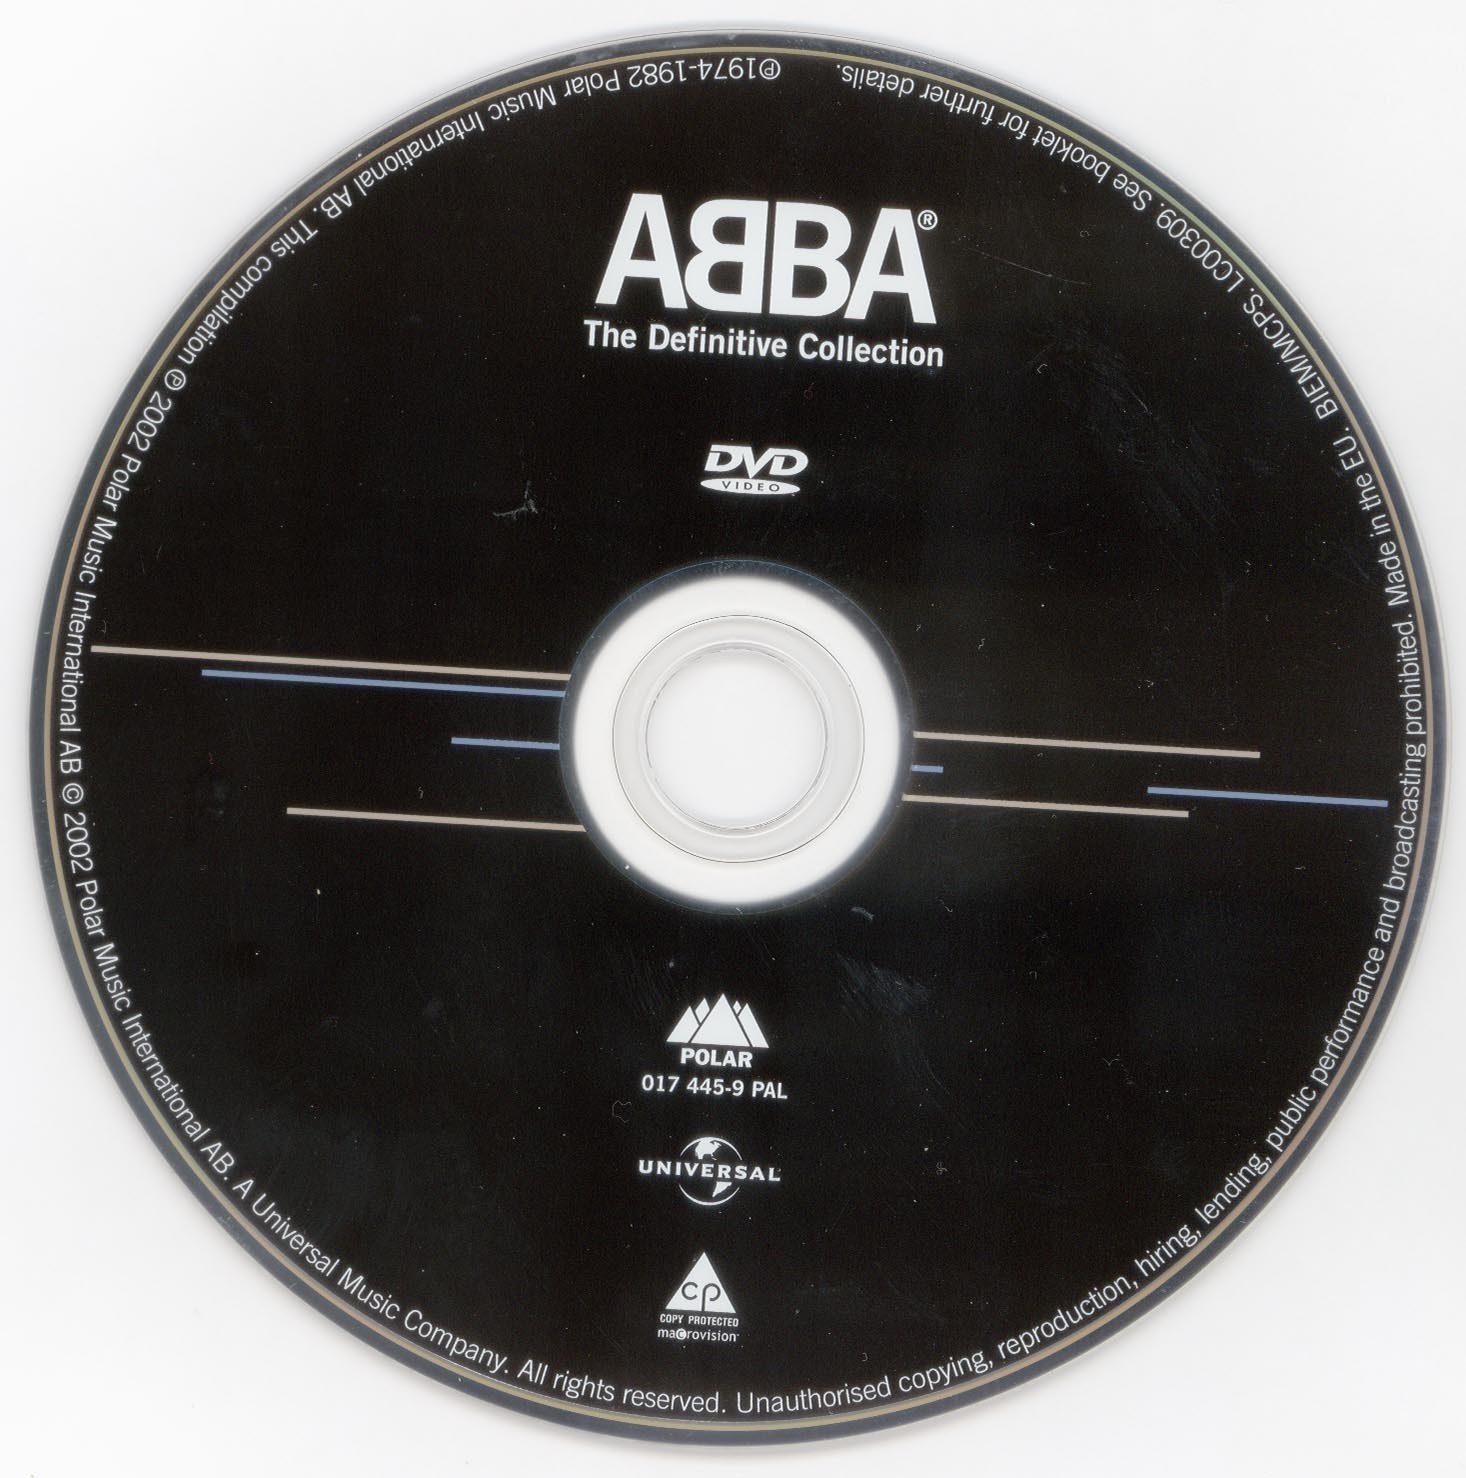 Galeria - Abba - The Definitive Collection HQ dvd-label.jpg